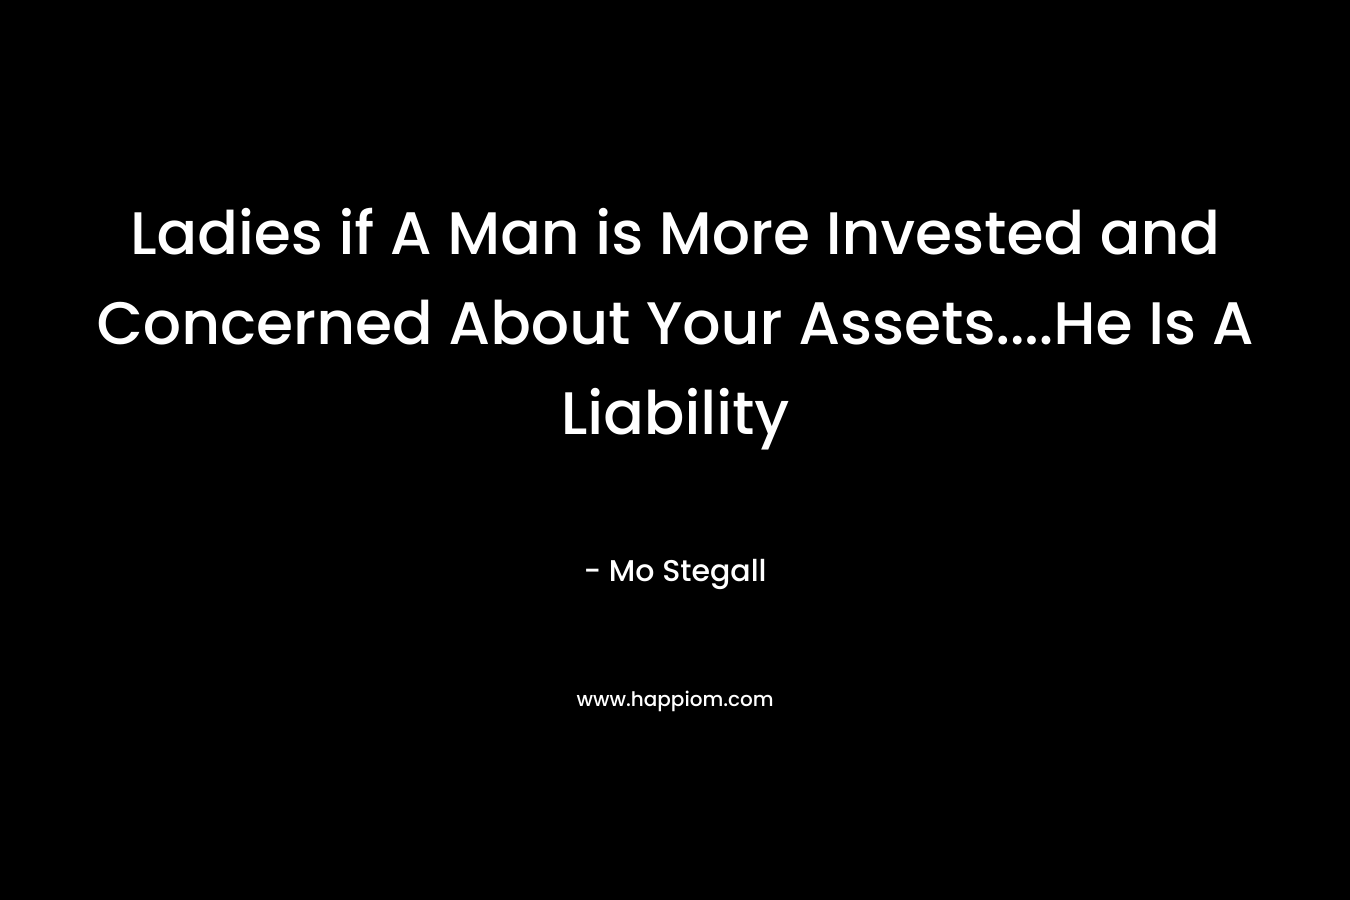 Ladies if A Man is More Invested and Concerned About Your Assets....He Is A Liability